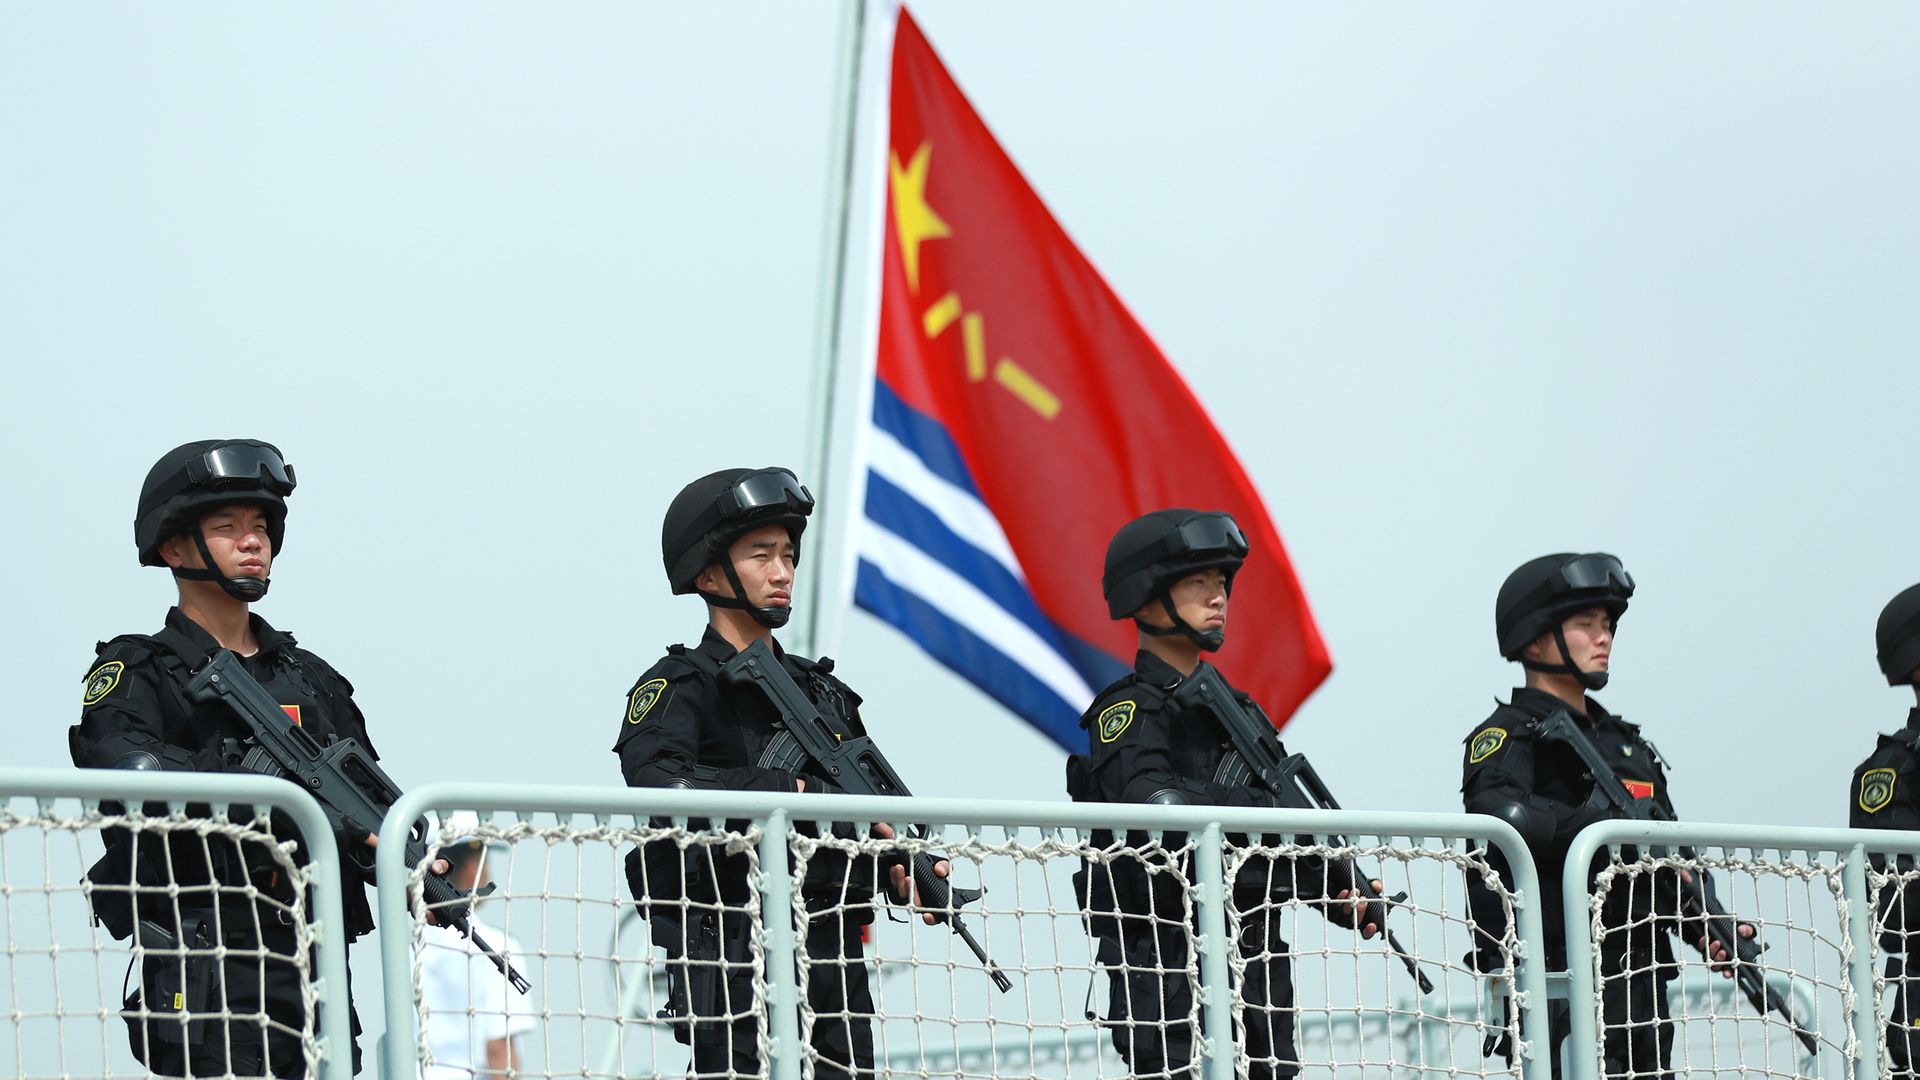 Members of the Chines Navy stand on the deck of a navy ship.